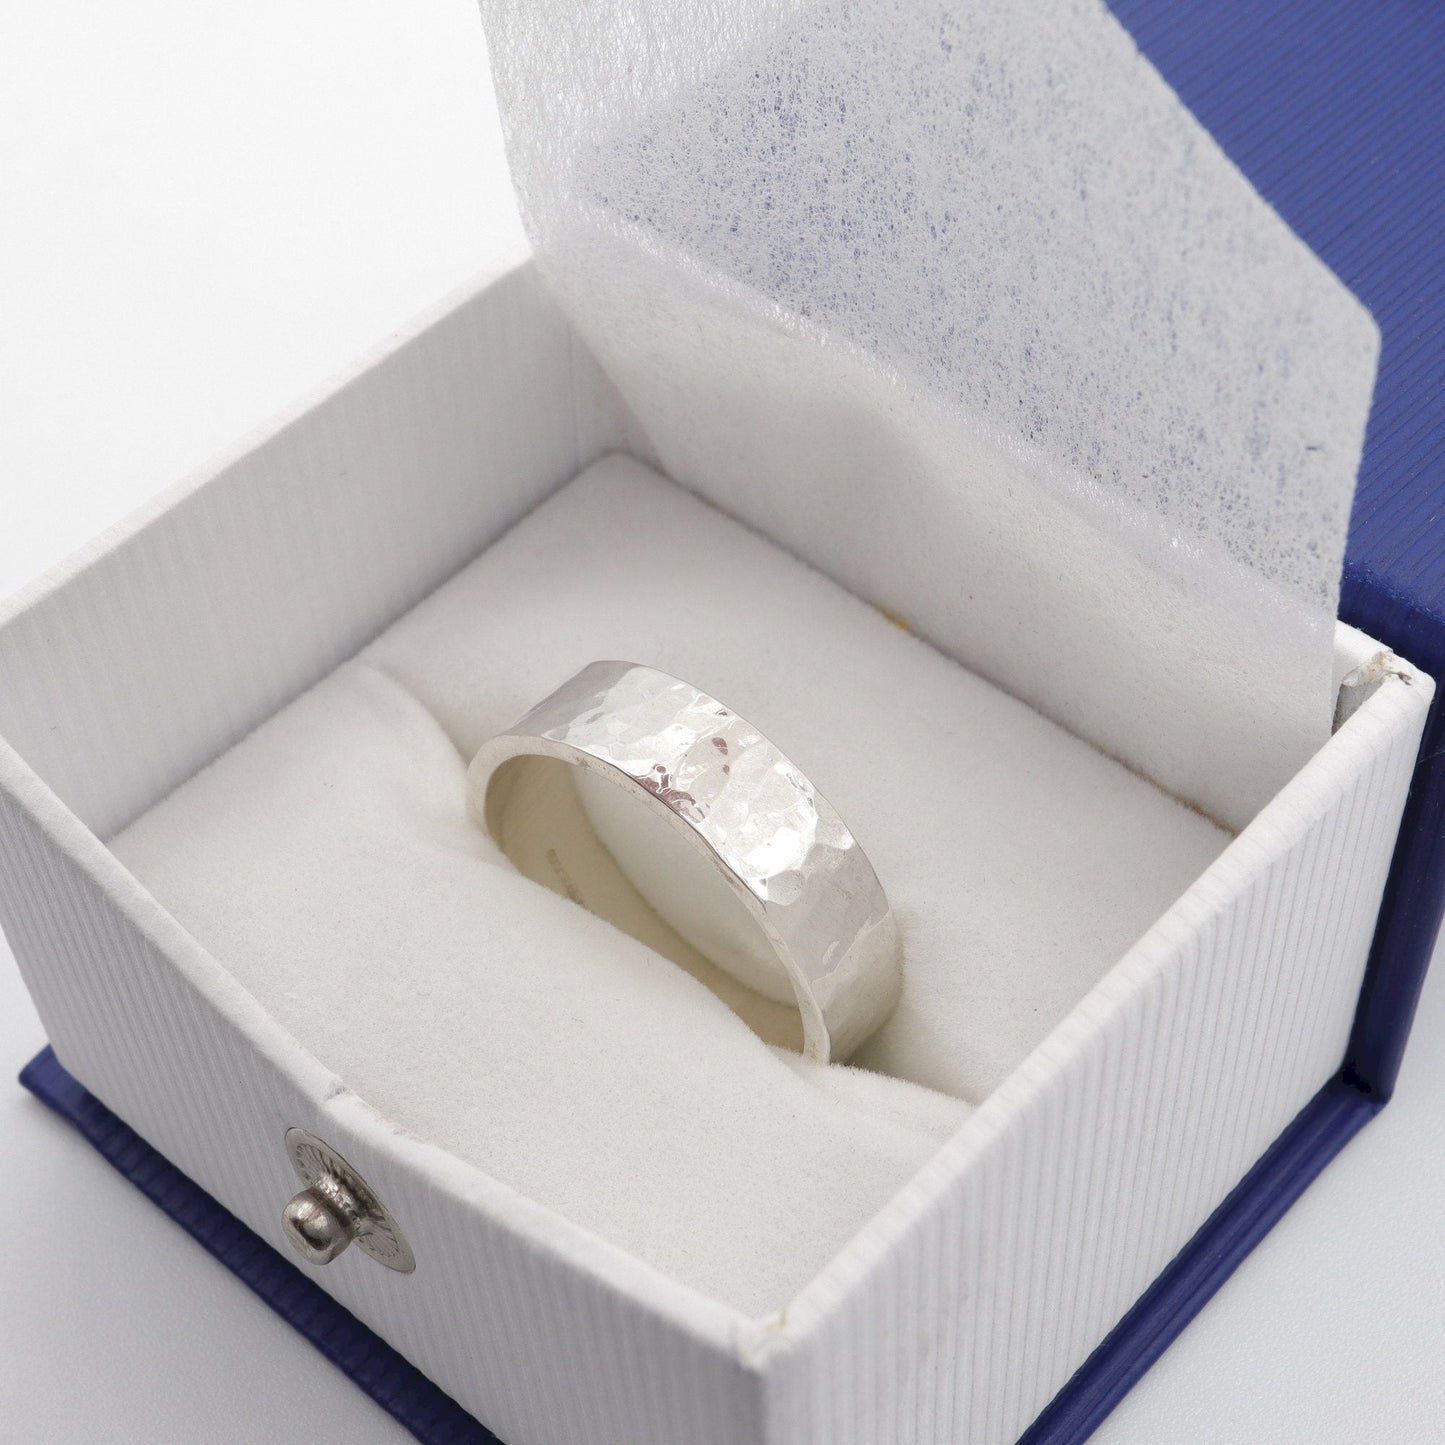 Silver hammered commitment, promise, engagement ring - flat textured wide band - Keswick design.